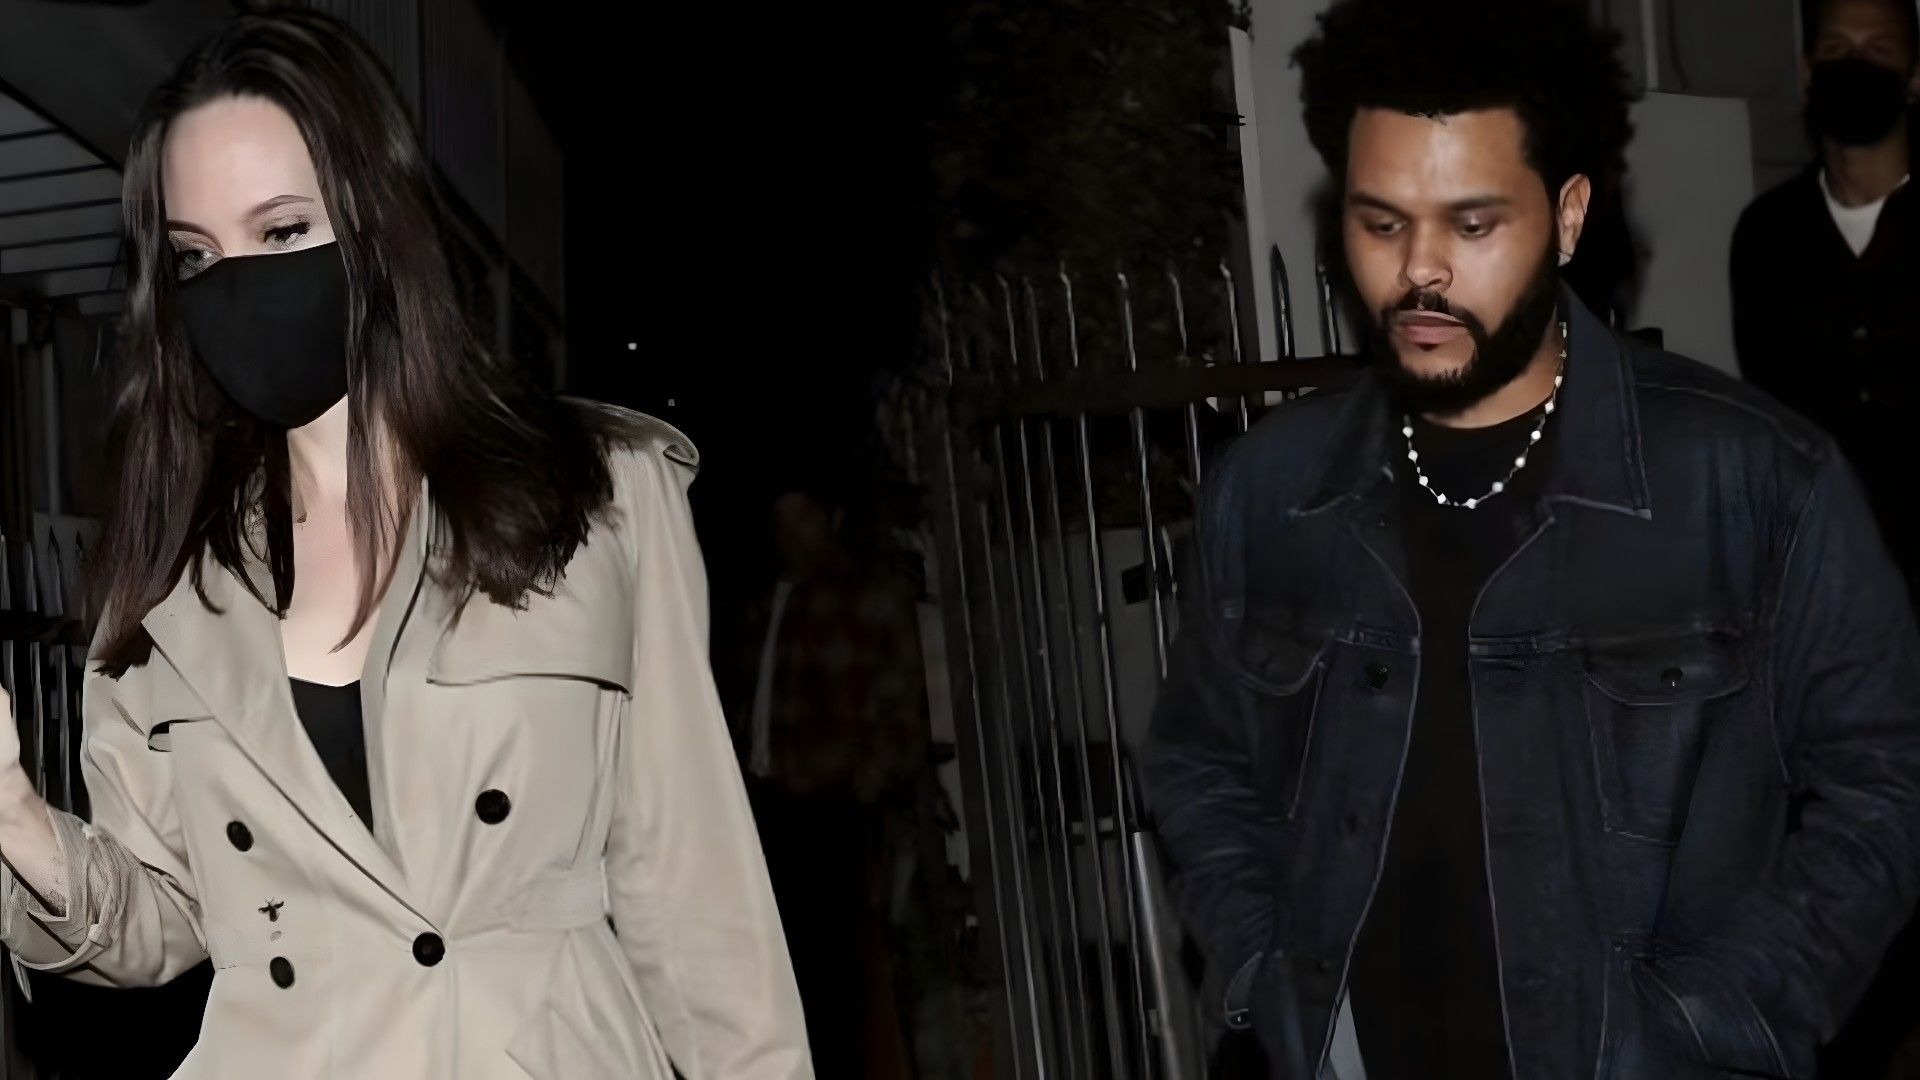 Jolie and Weeknd were spotted on a date